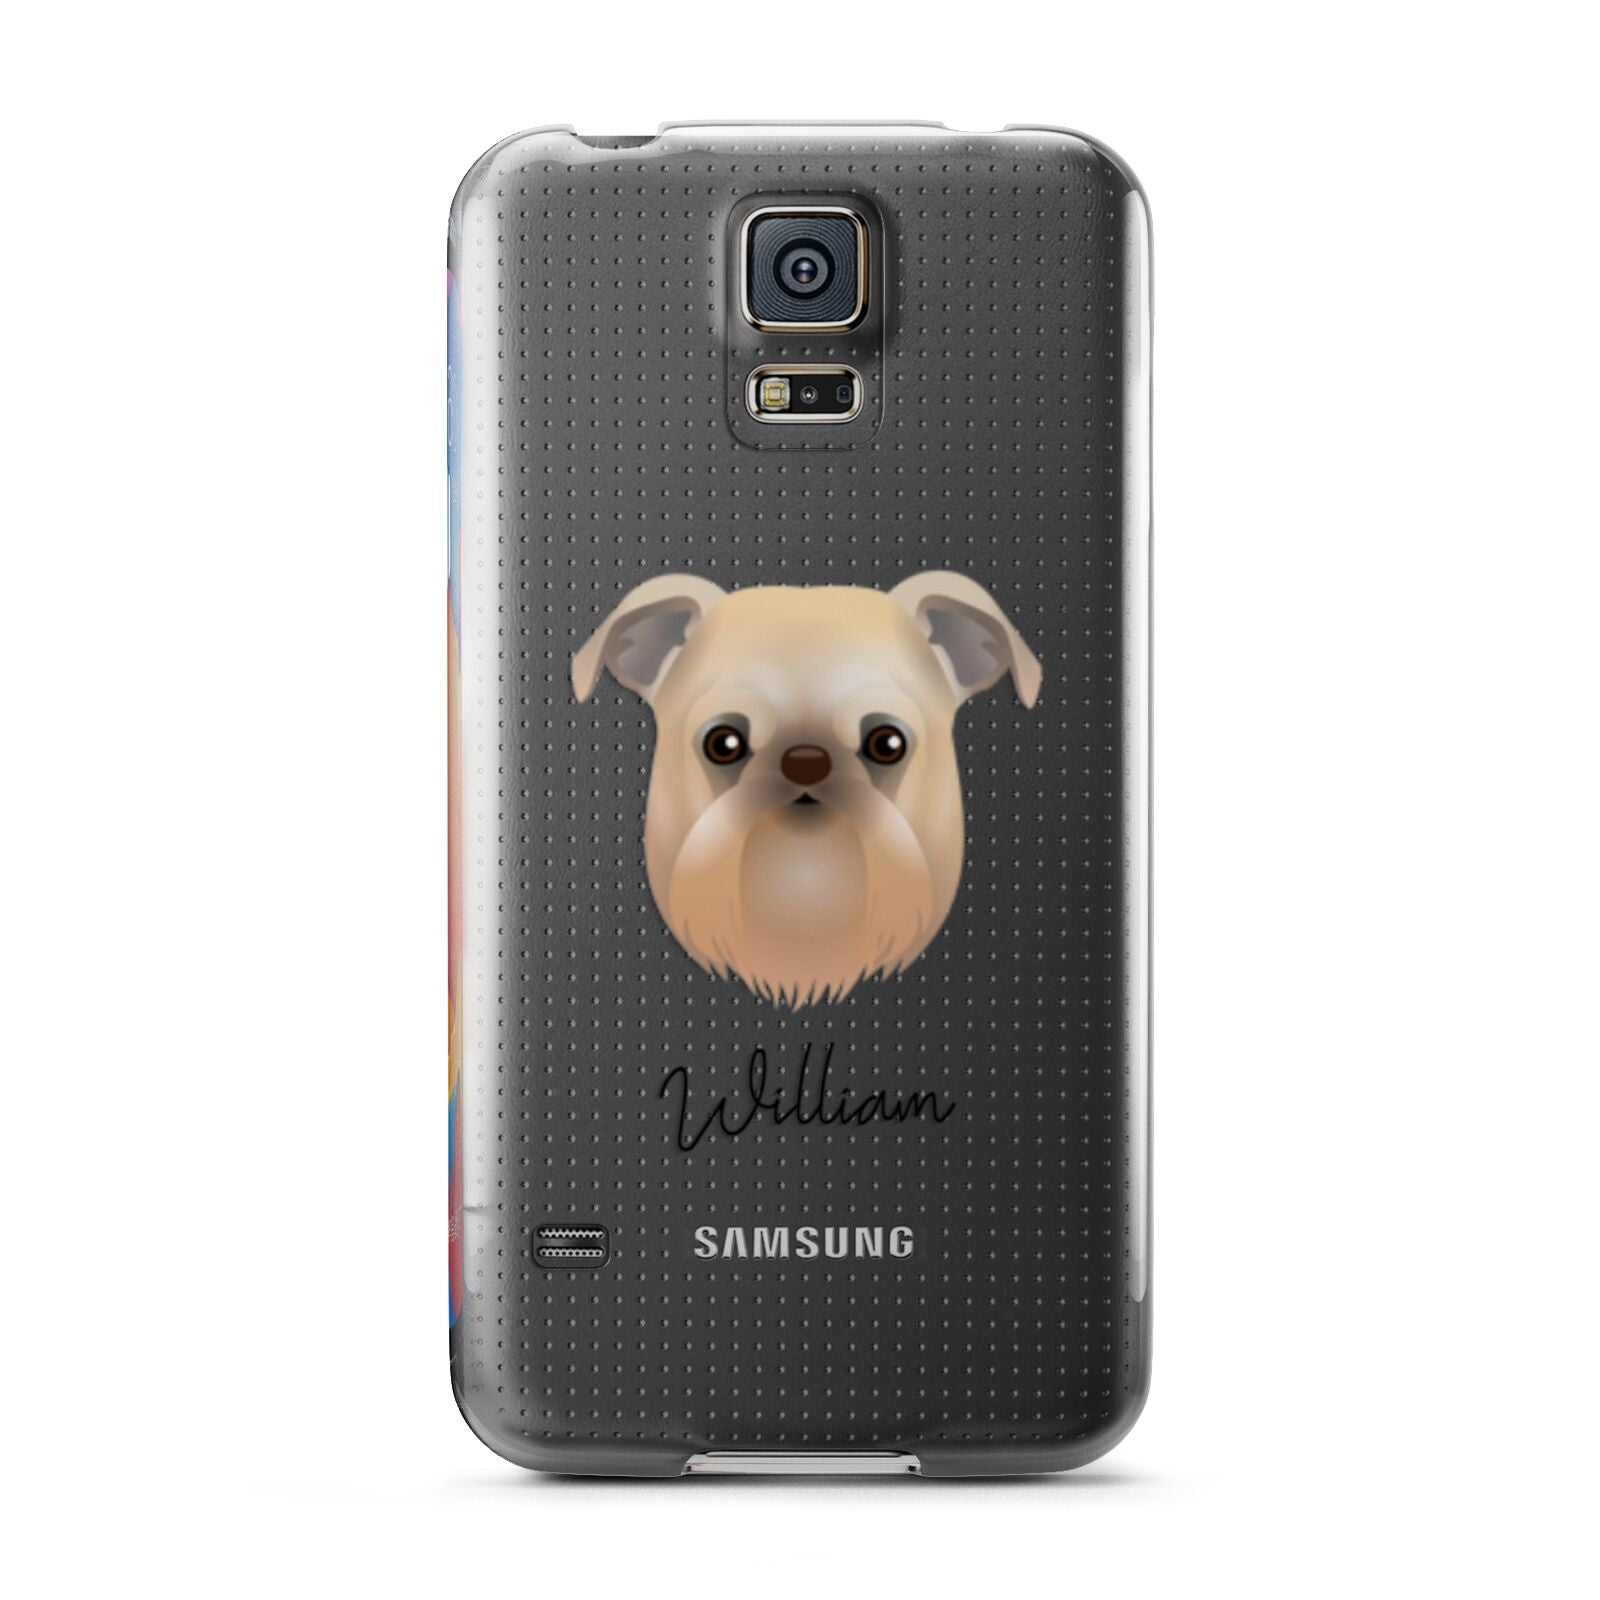 Griffon Bruxellois Personalised Samsung Galaxy S5 Case